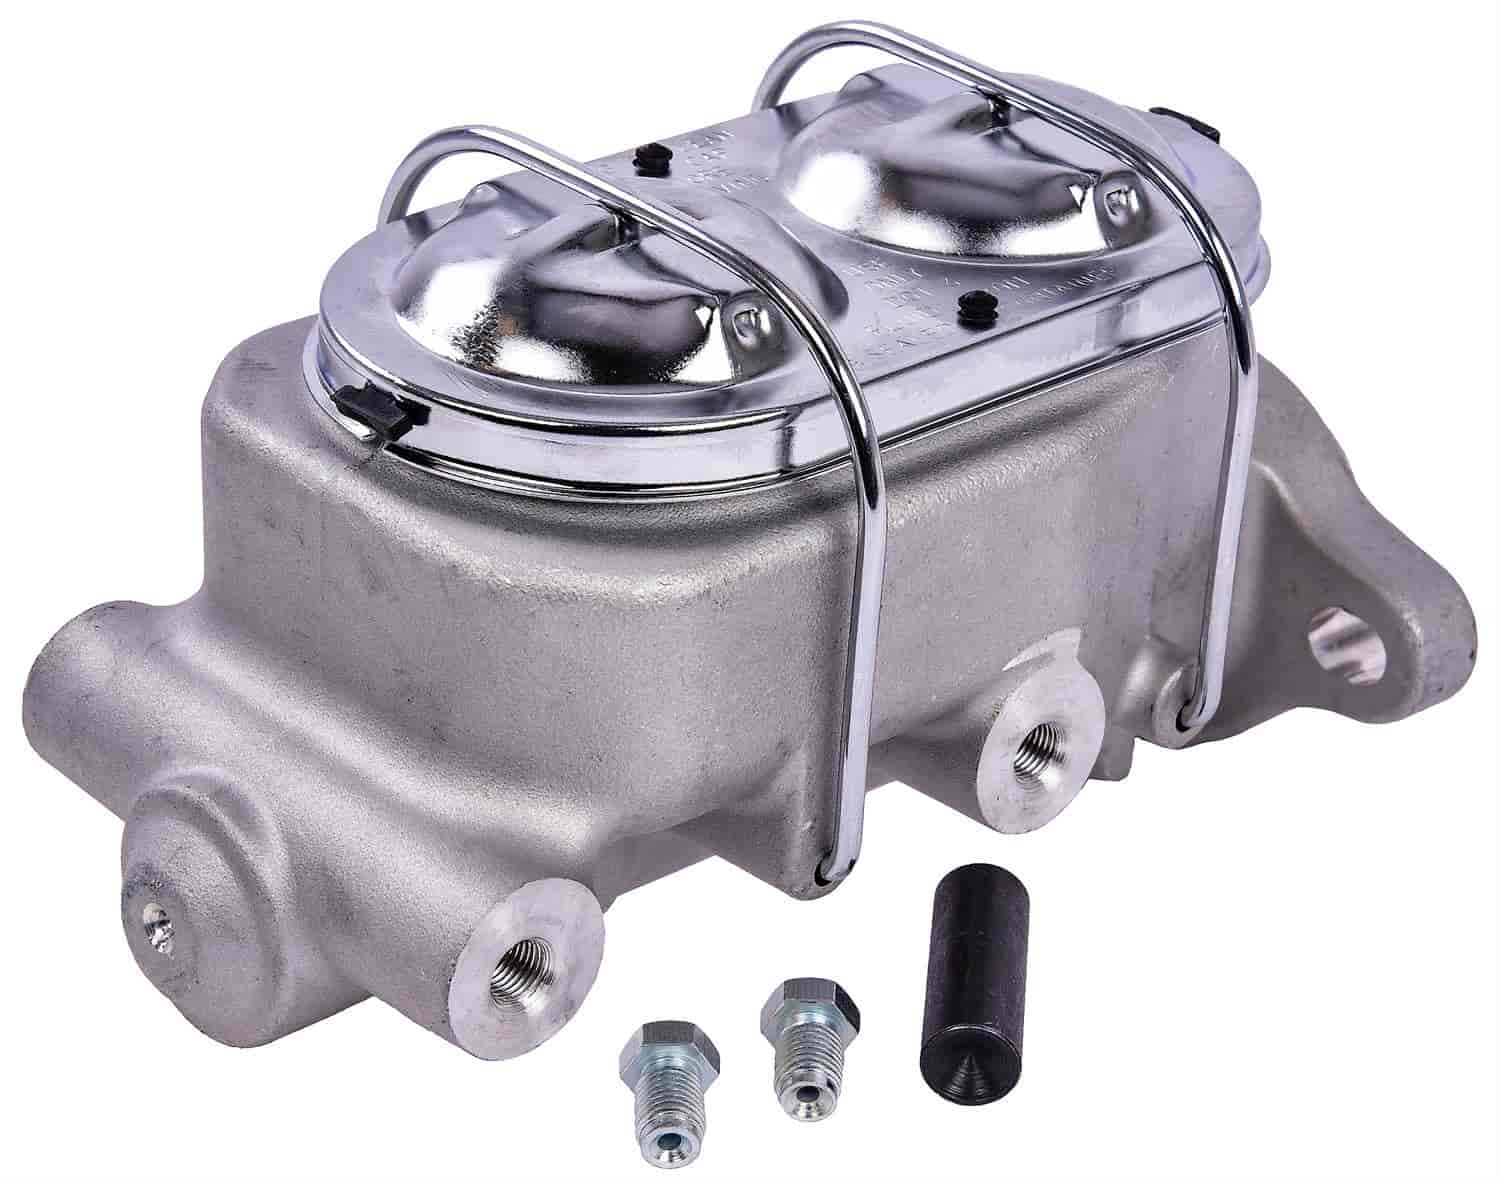 Brake Master Cylinder with Dual Reservoir, Aluminum with Natural Finish [Corvette Style]